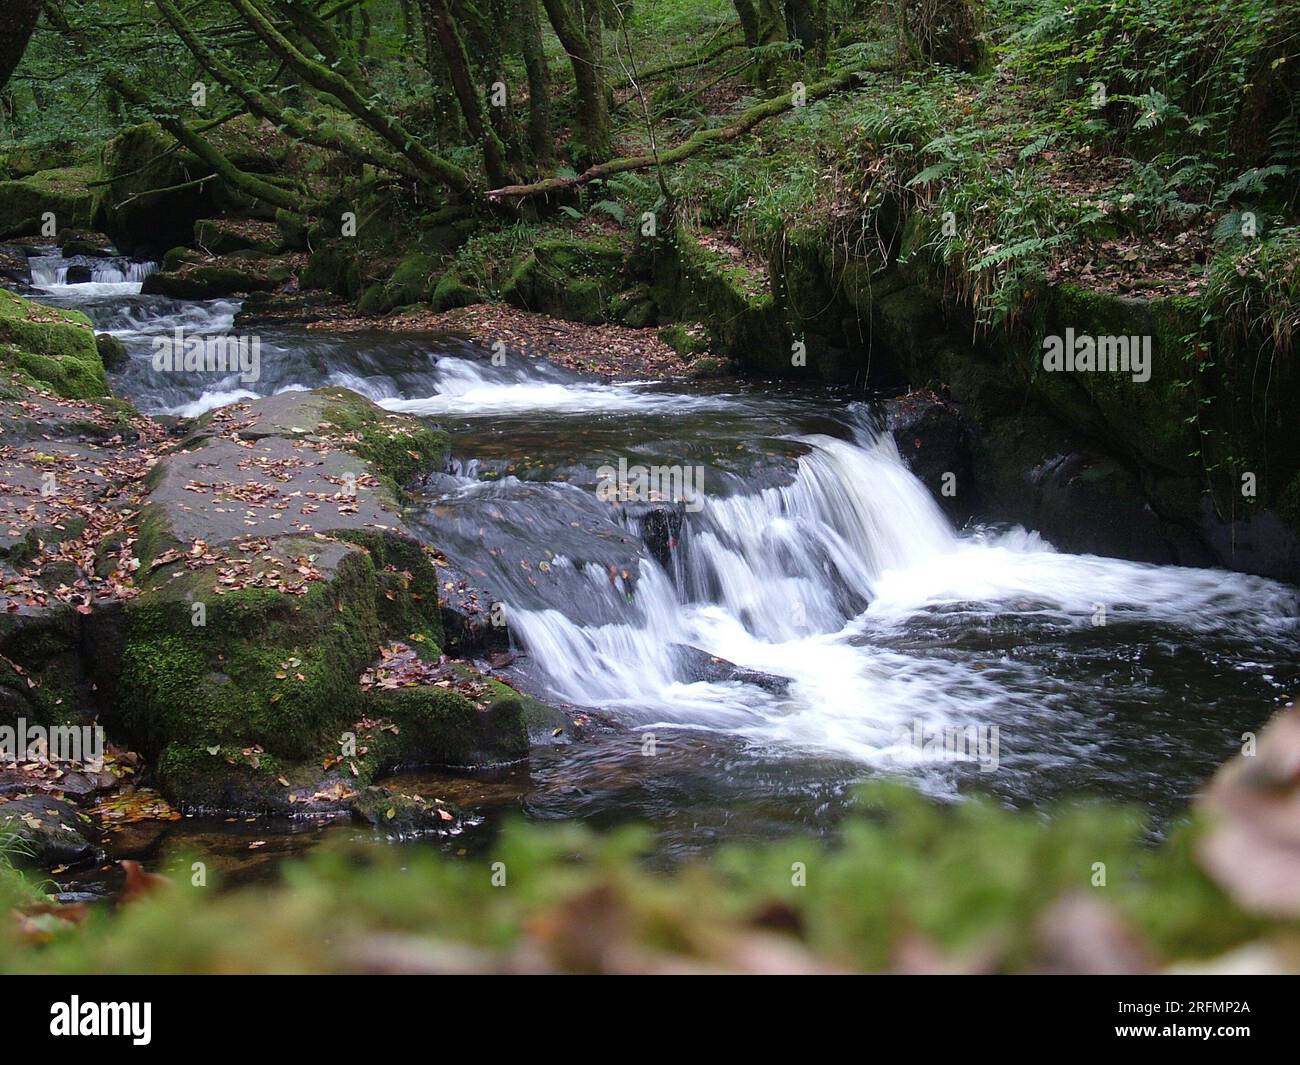 Cascade on the Fowey river in autumn at the Golitha Falls as it passes through the ancient Oak woodlands on the edge of Bodmin moor in Cornwall.UK Stock Photo